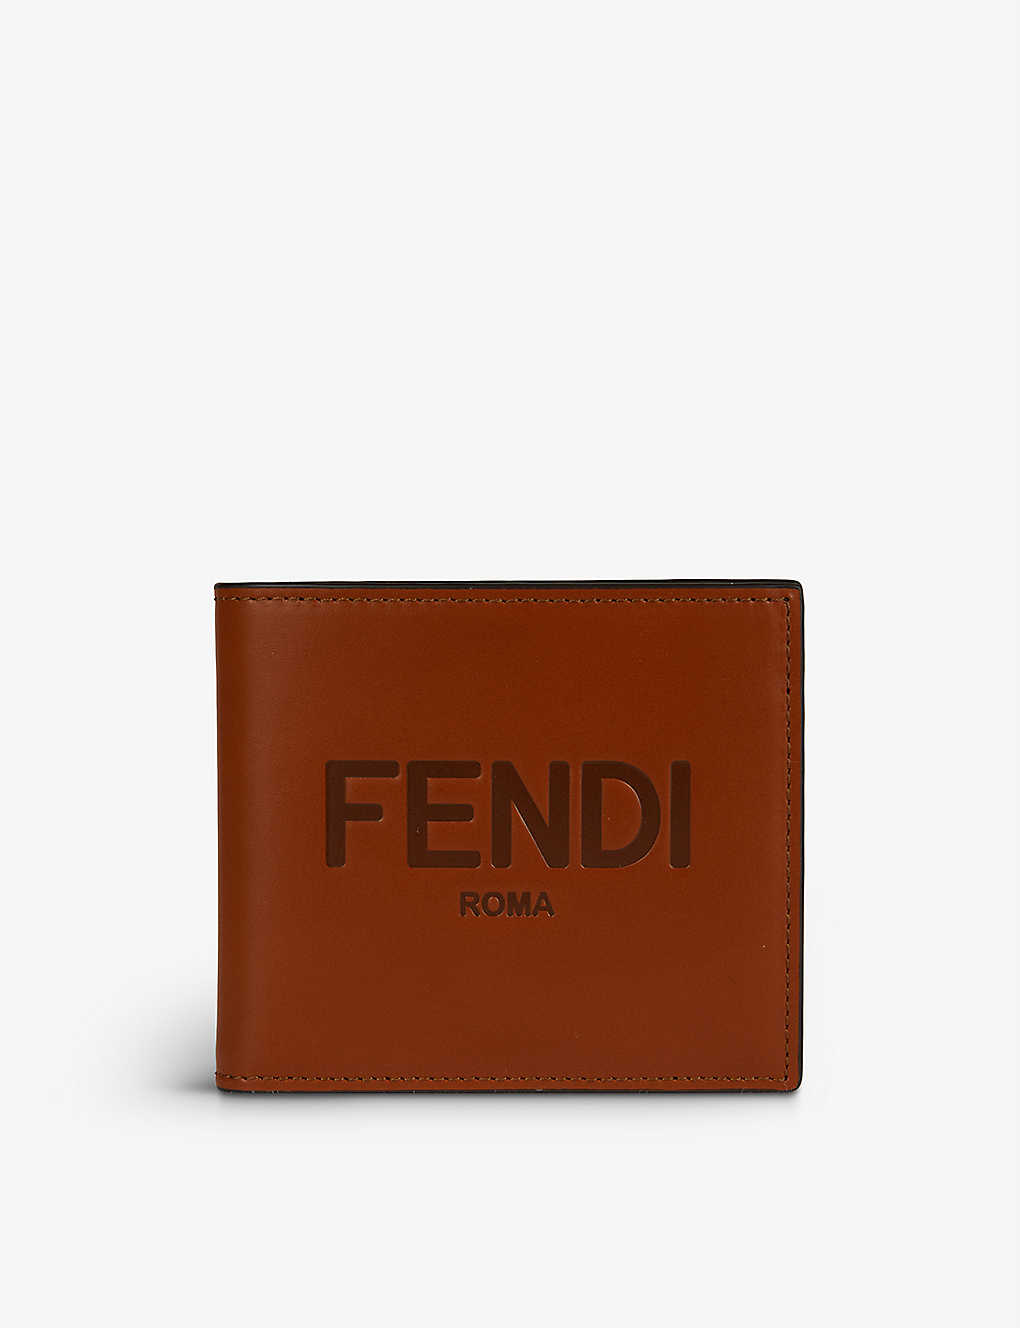 Roma brand-plaque leather billfold wallet(9124434)